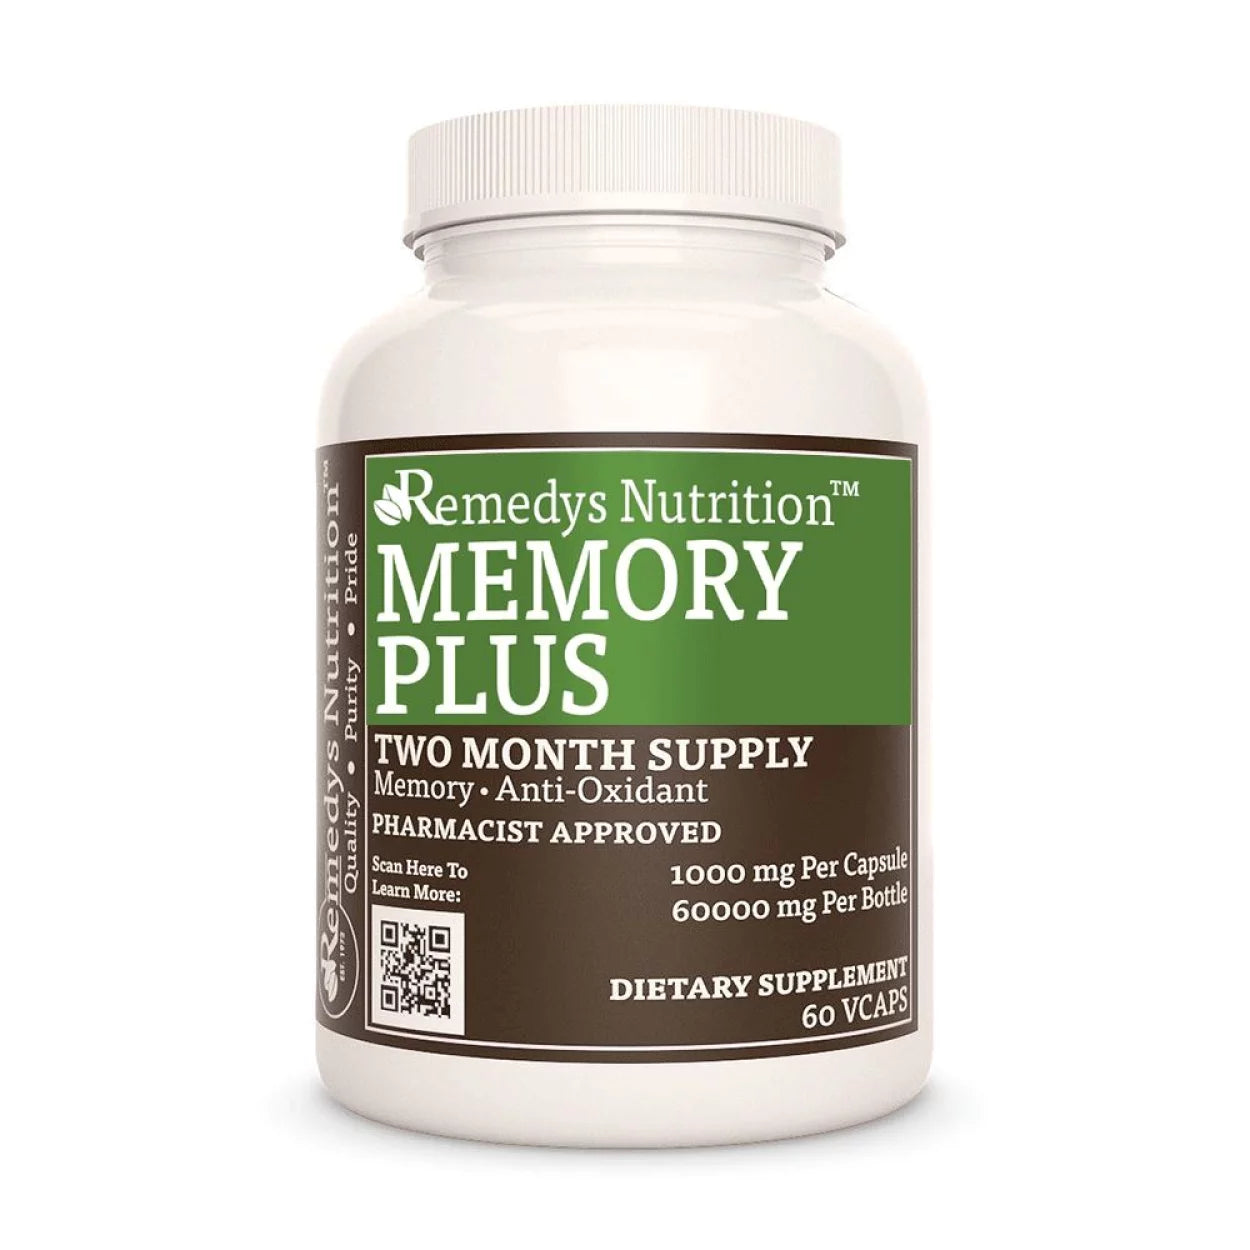 Image of Remedy's Nutrition® Memory Plus™ Capsules Herbal Dietary Supplement front bottle. Made in USA. Ginseng, Rosemary. 